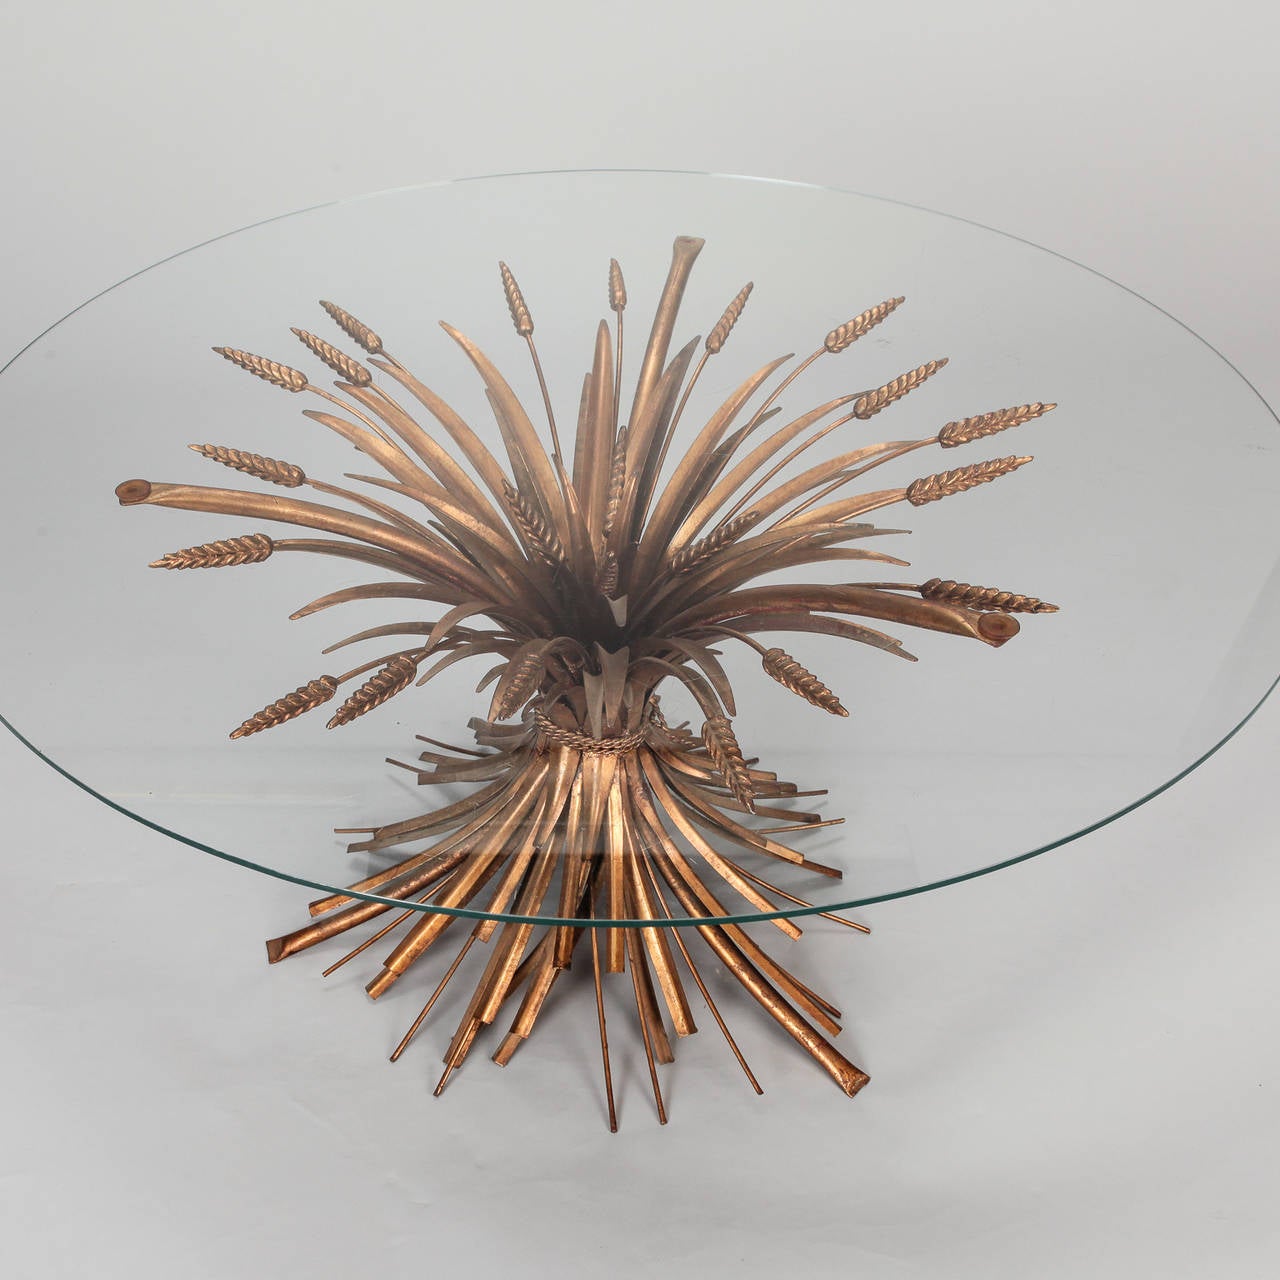 Cocktail or side table has a gilded metal base in the form of gathered wheat sheaves with a round glass table top. Found in Europe probably originates from Italy, circa 1940s.